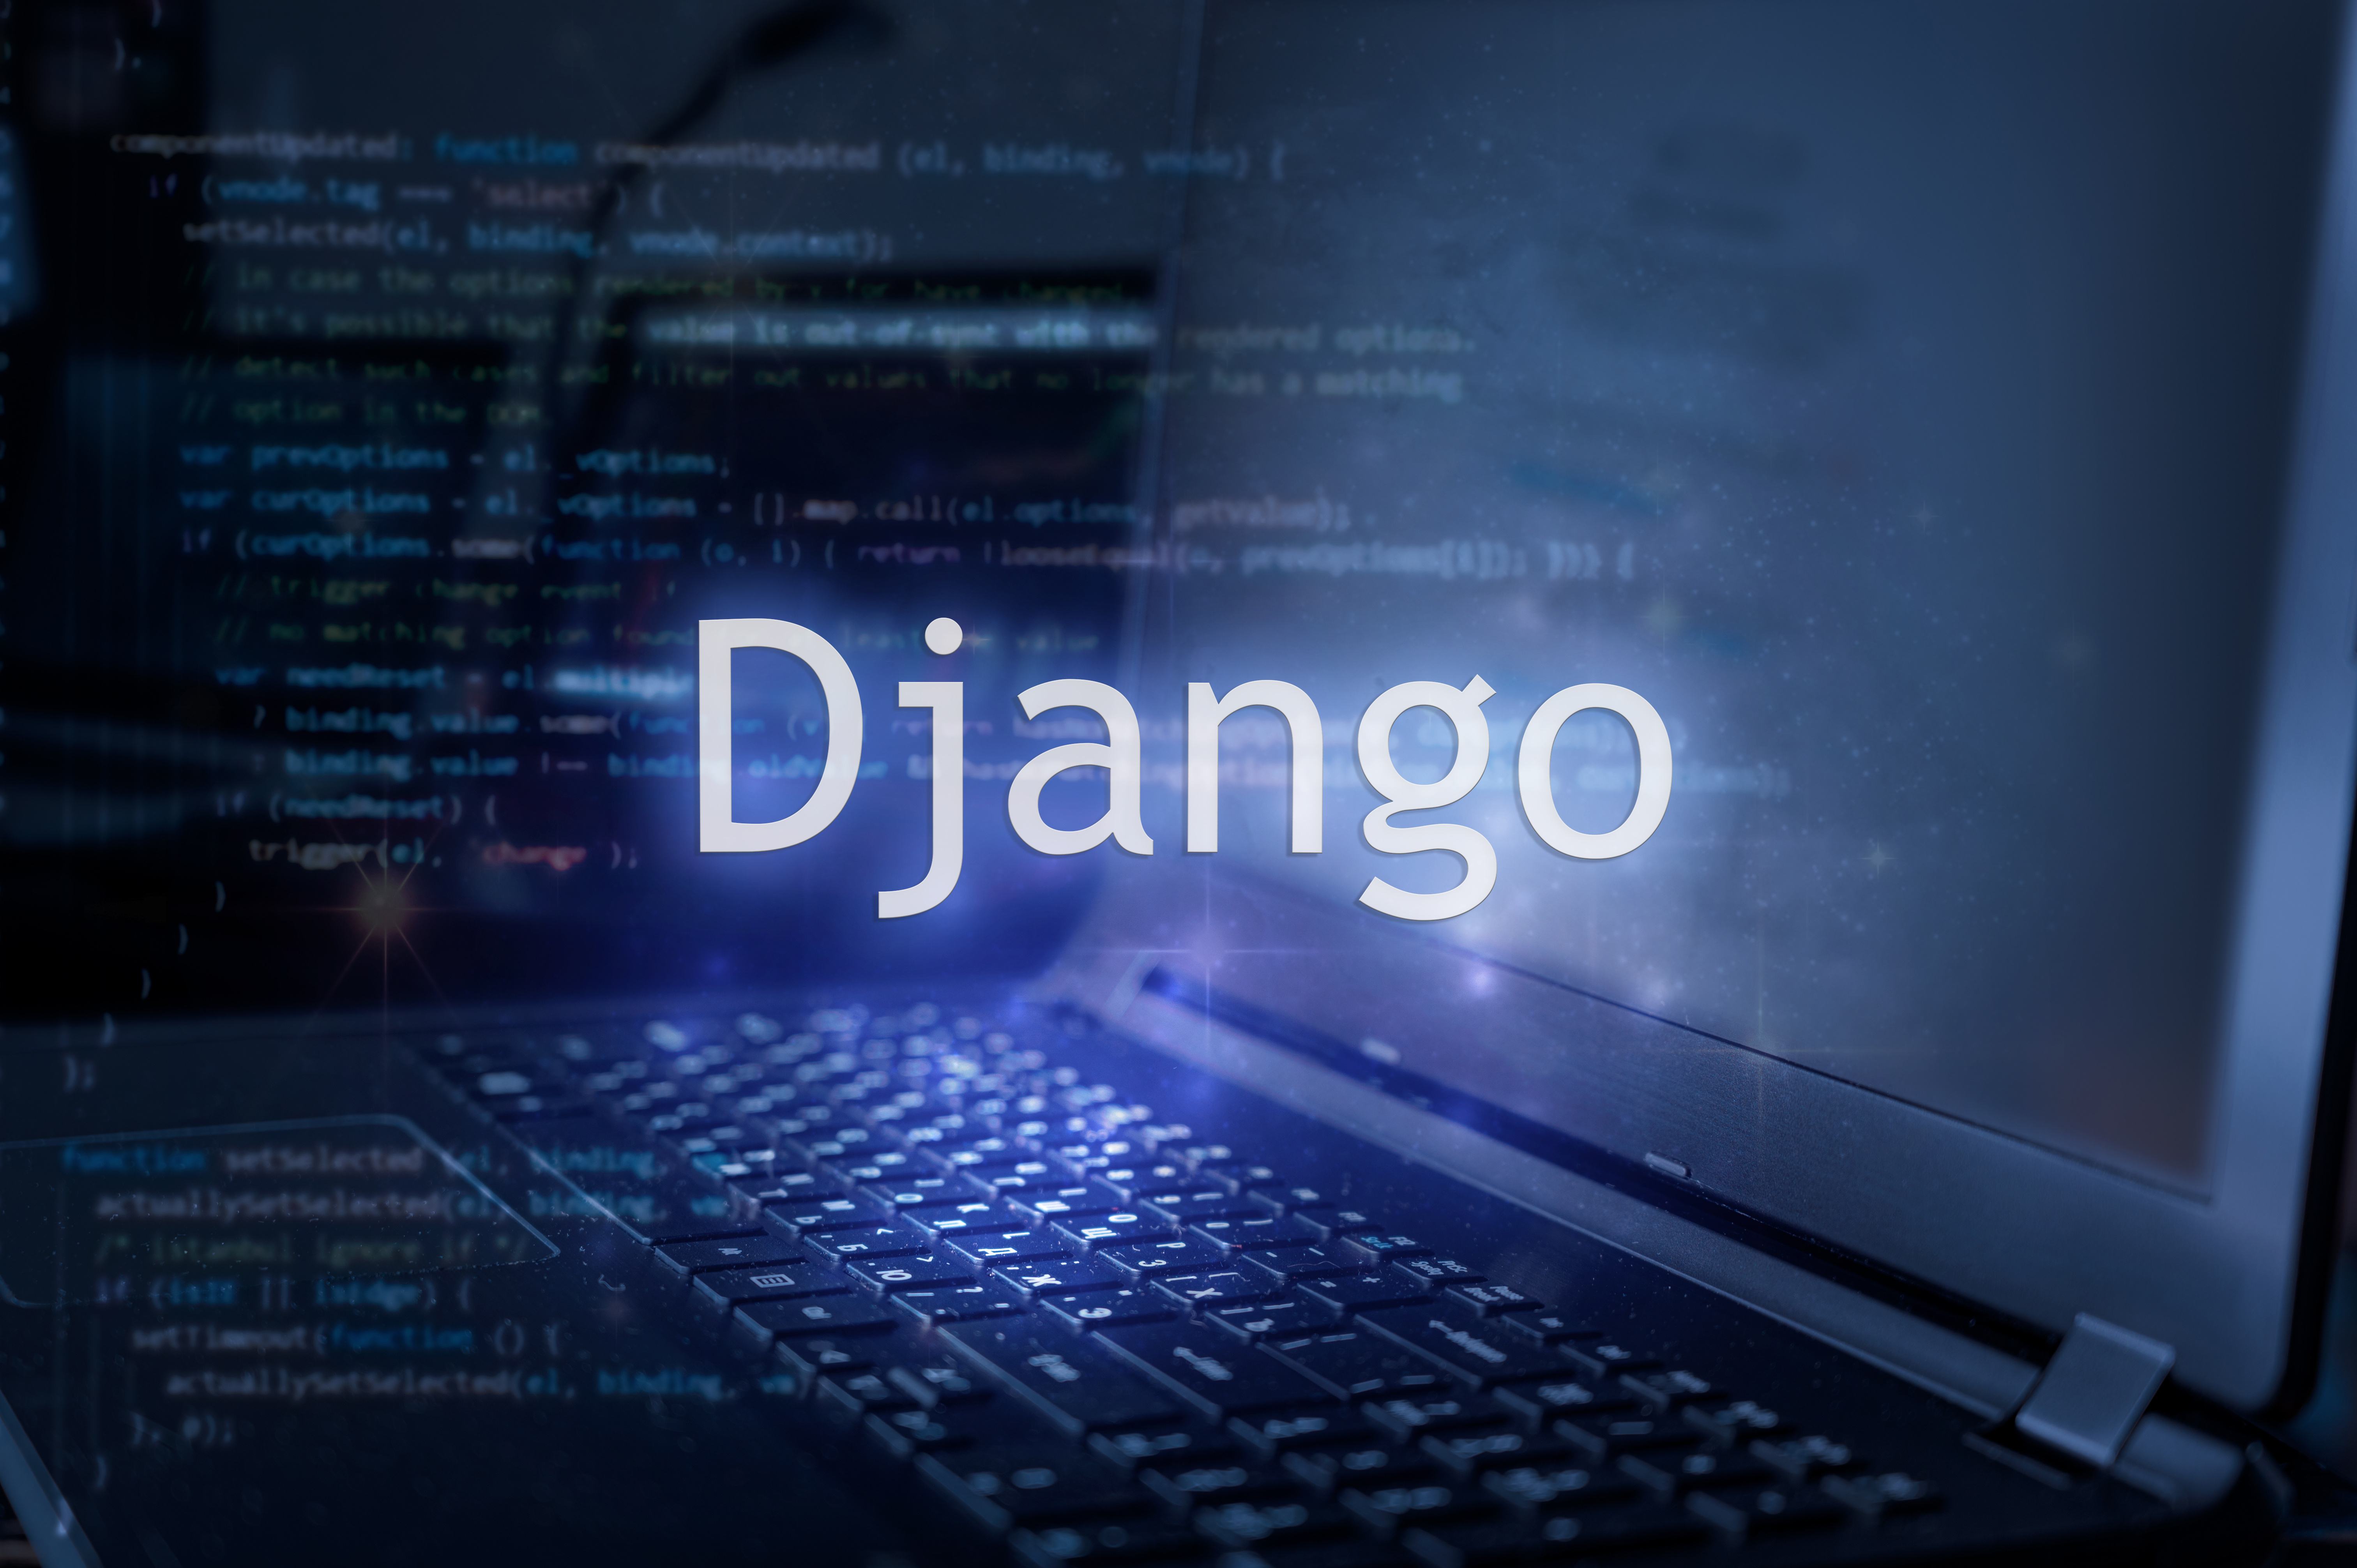 Picture of a laptop with Django in floating text above the image.